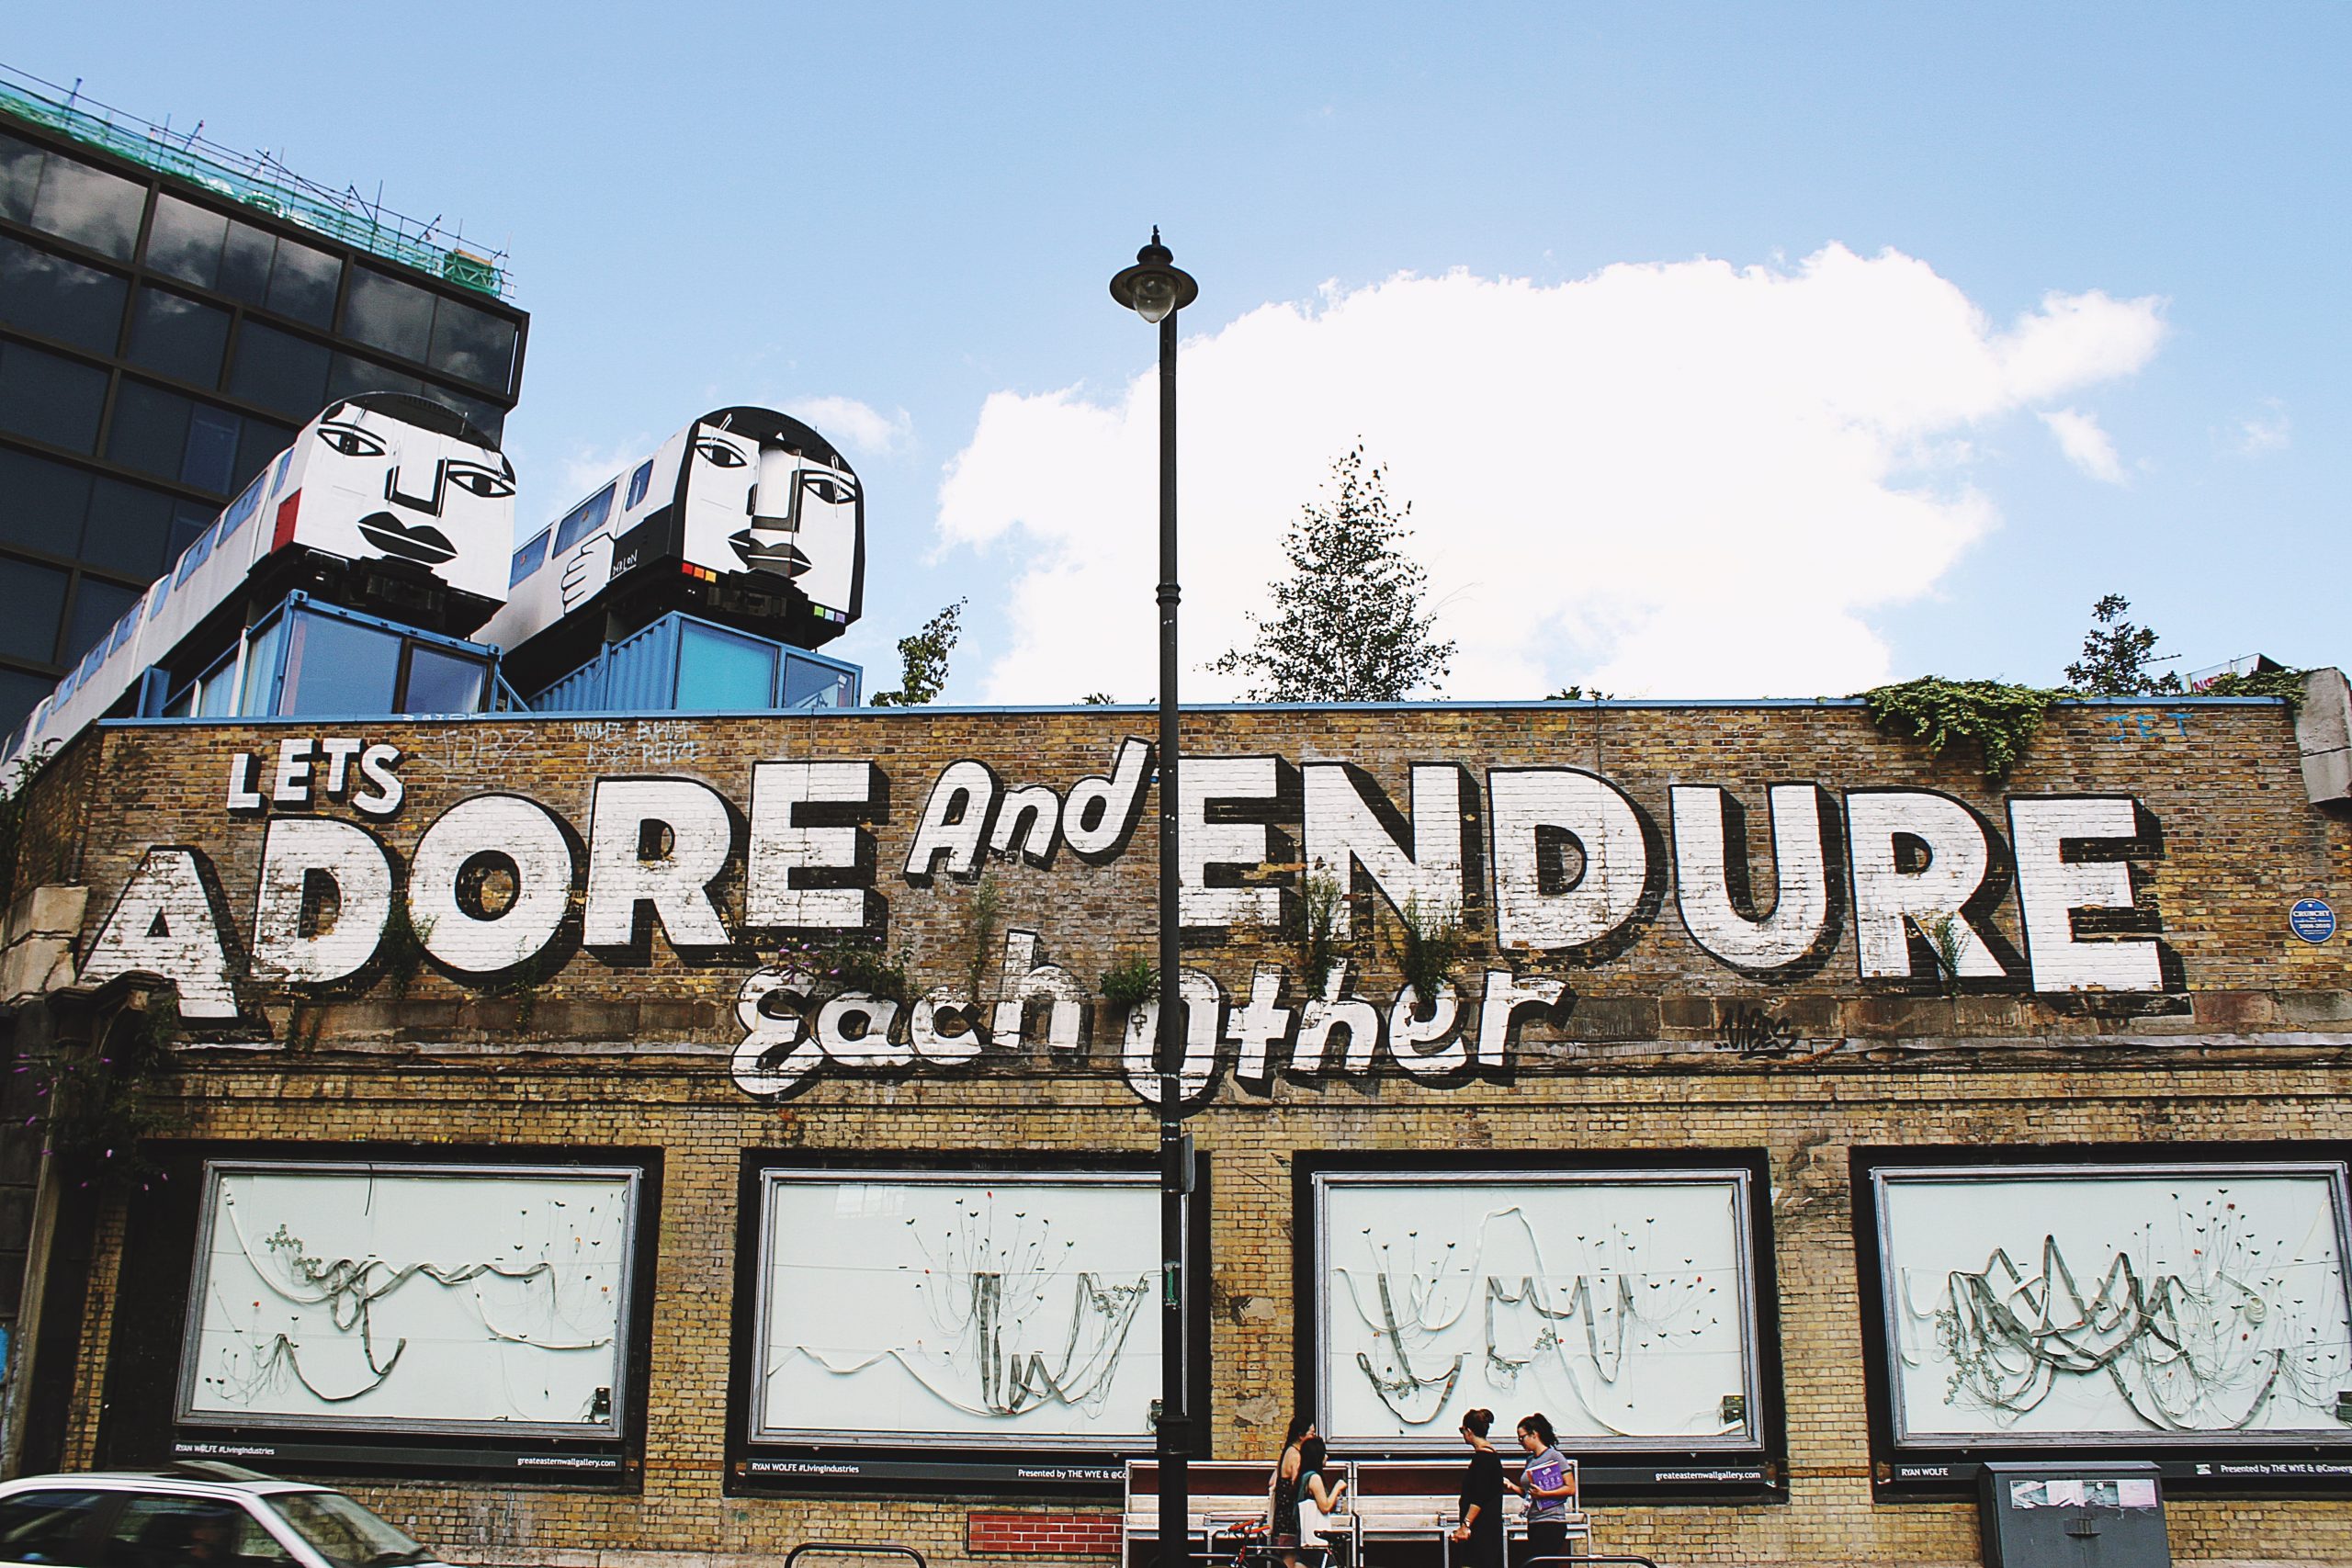 External of brick building with painted words reading "Adore and Endure Each Other" in London